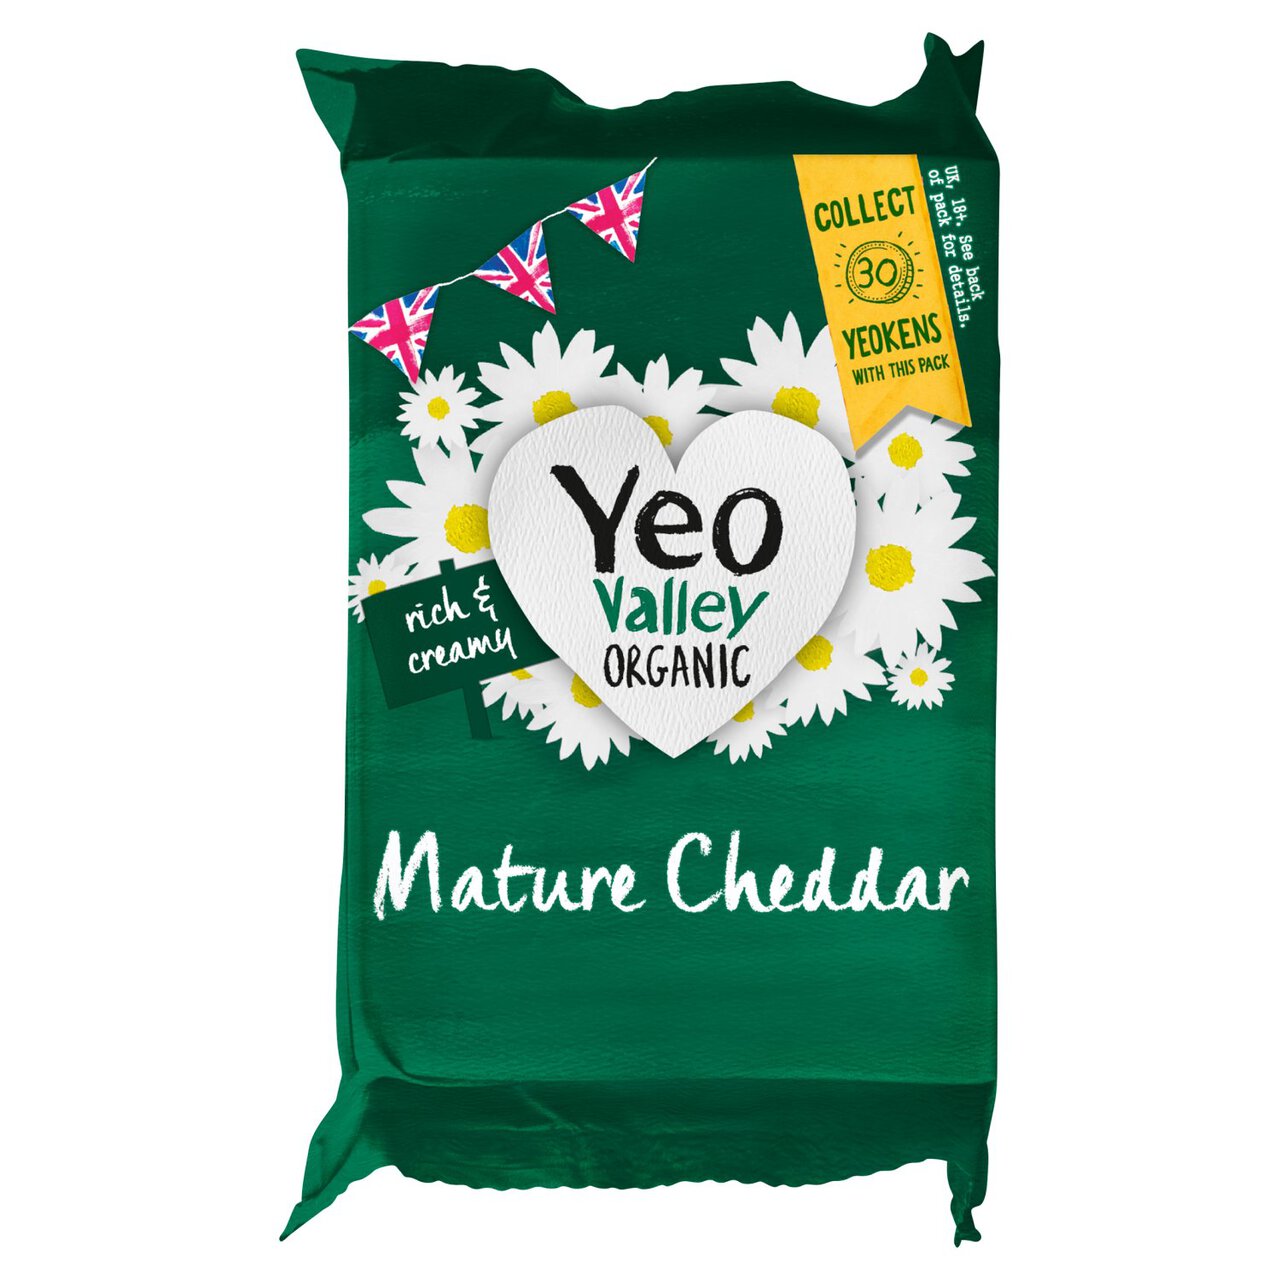 Yeo Valley Organic Mature Cheddar Cheese 300g